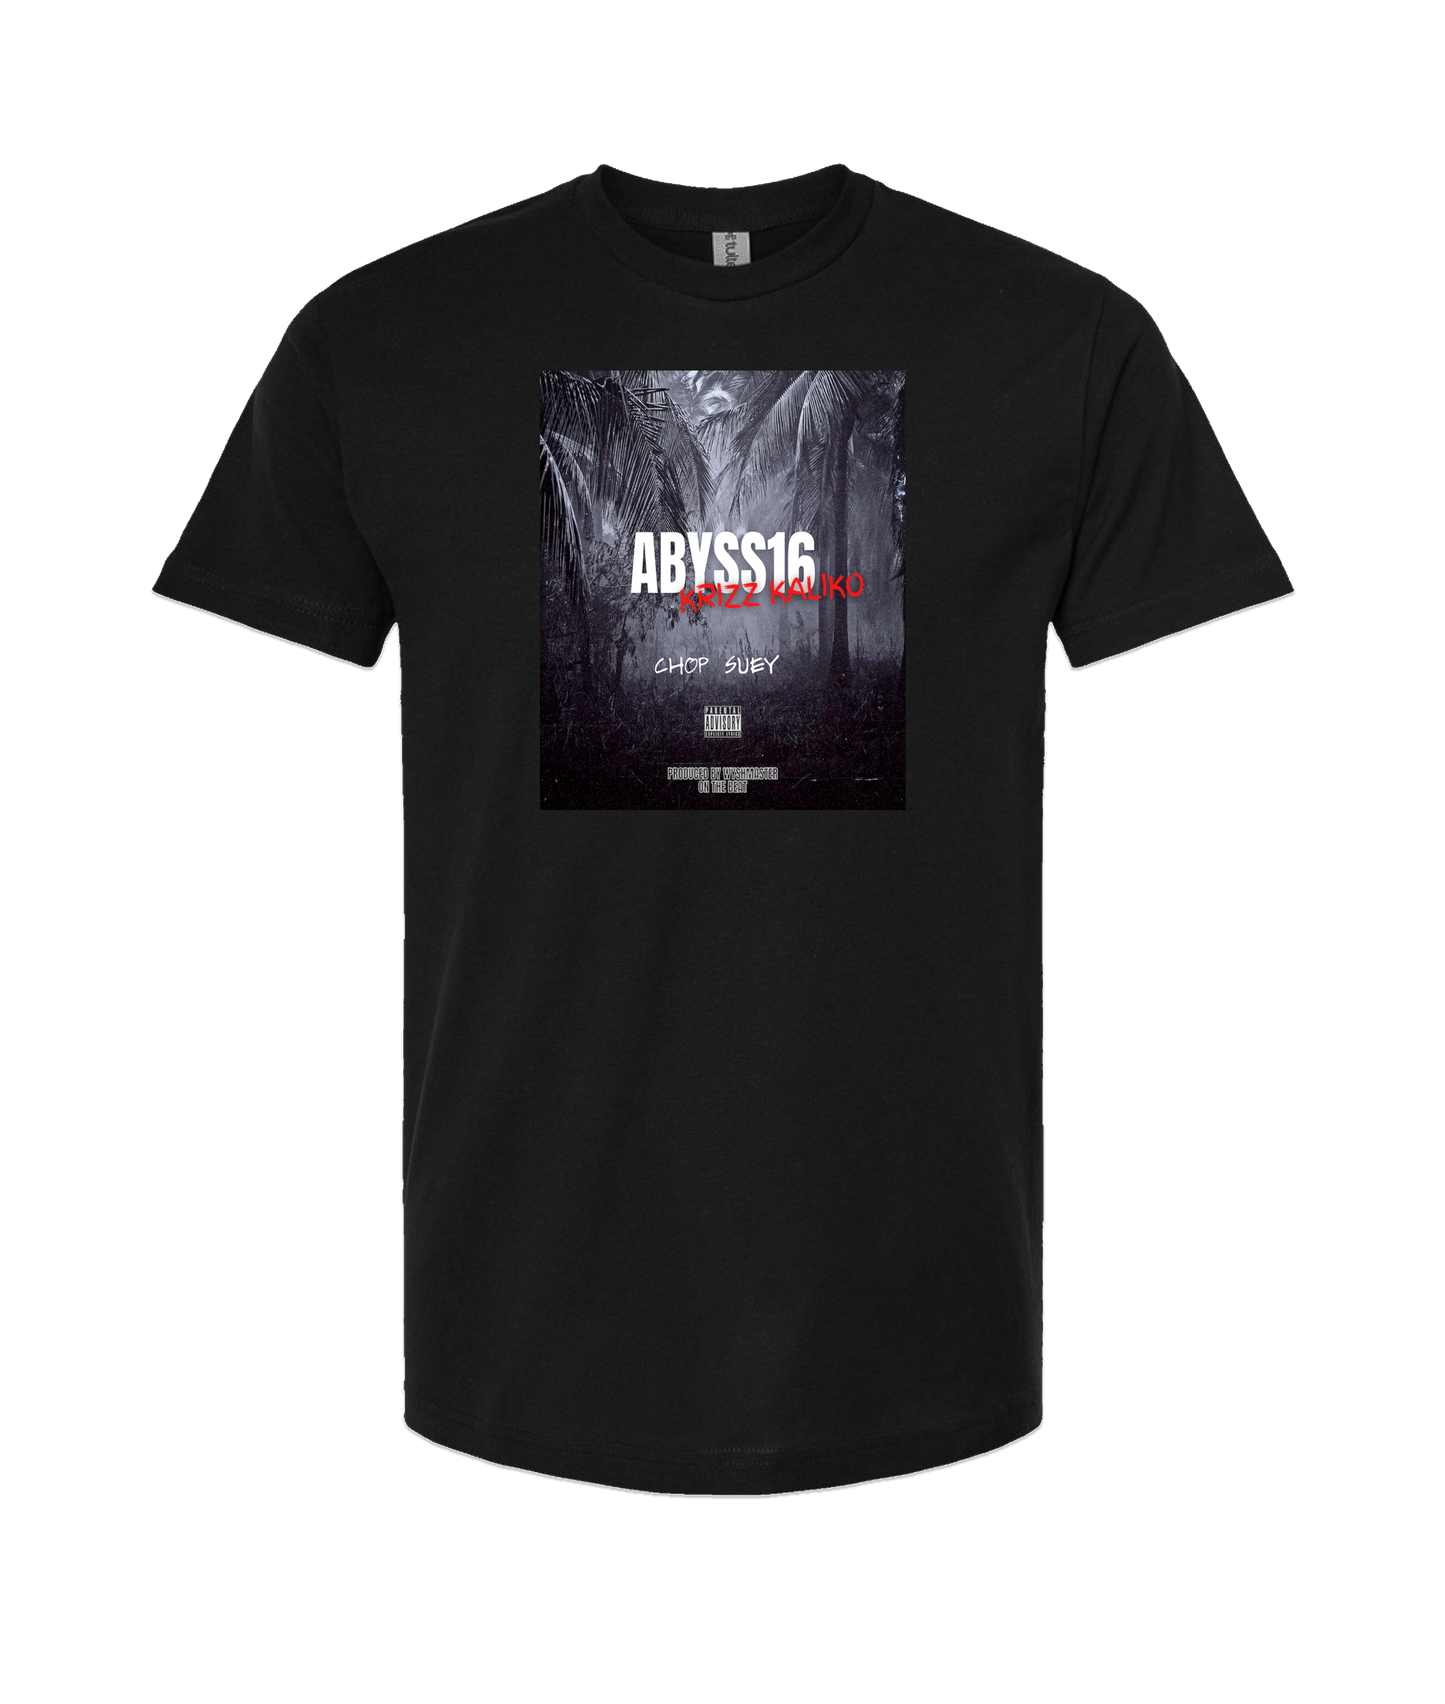 Abyss16
 - Abyss 2 - Black T Shirt